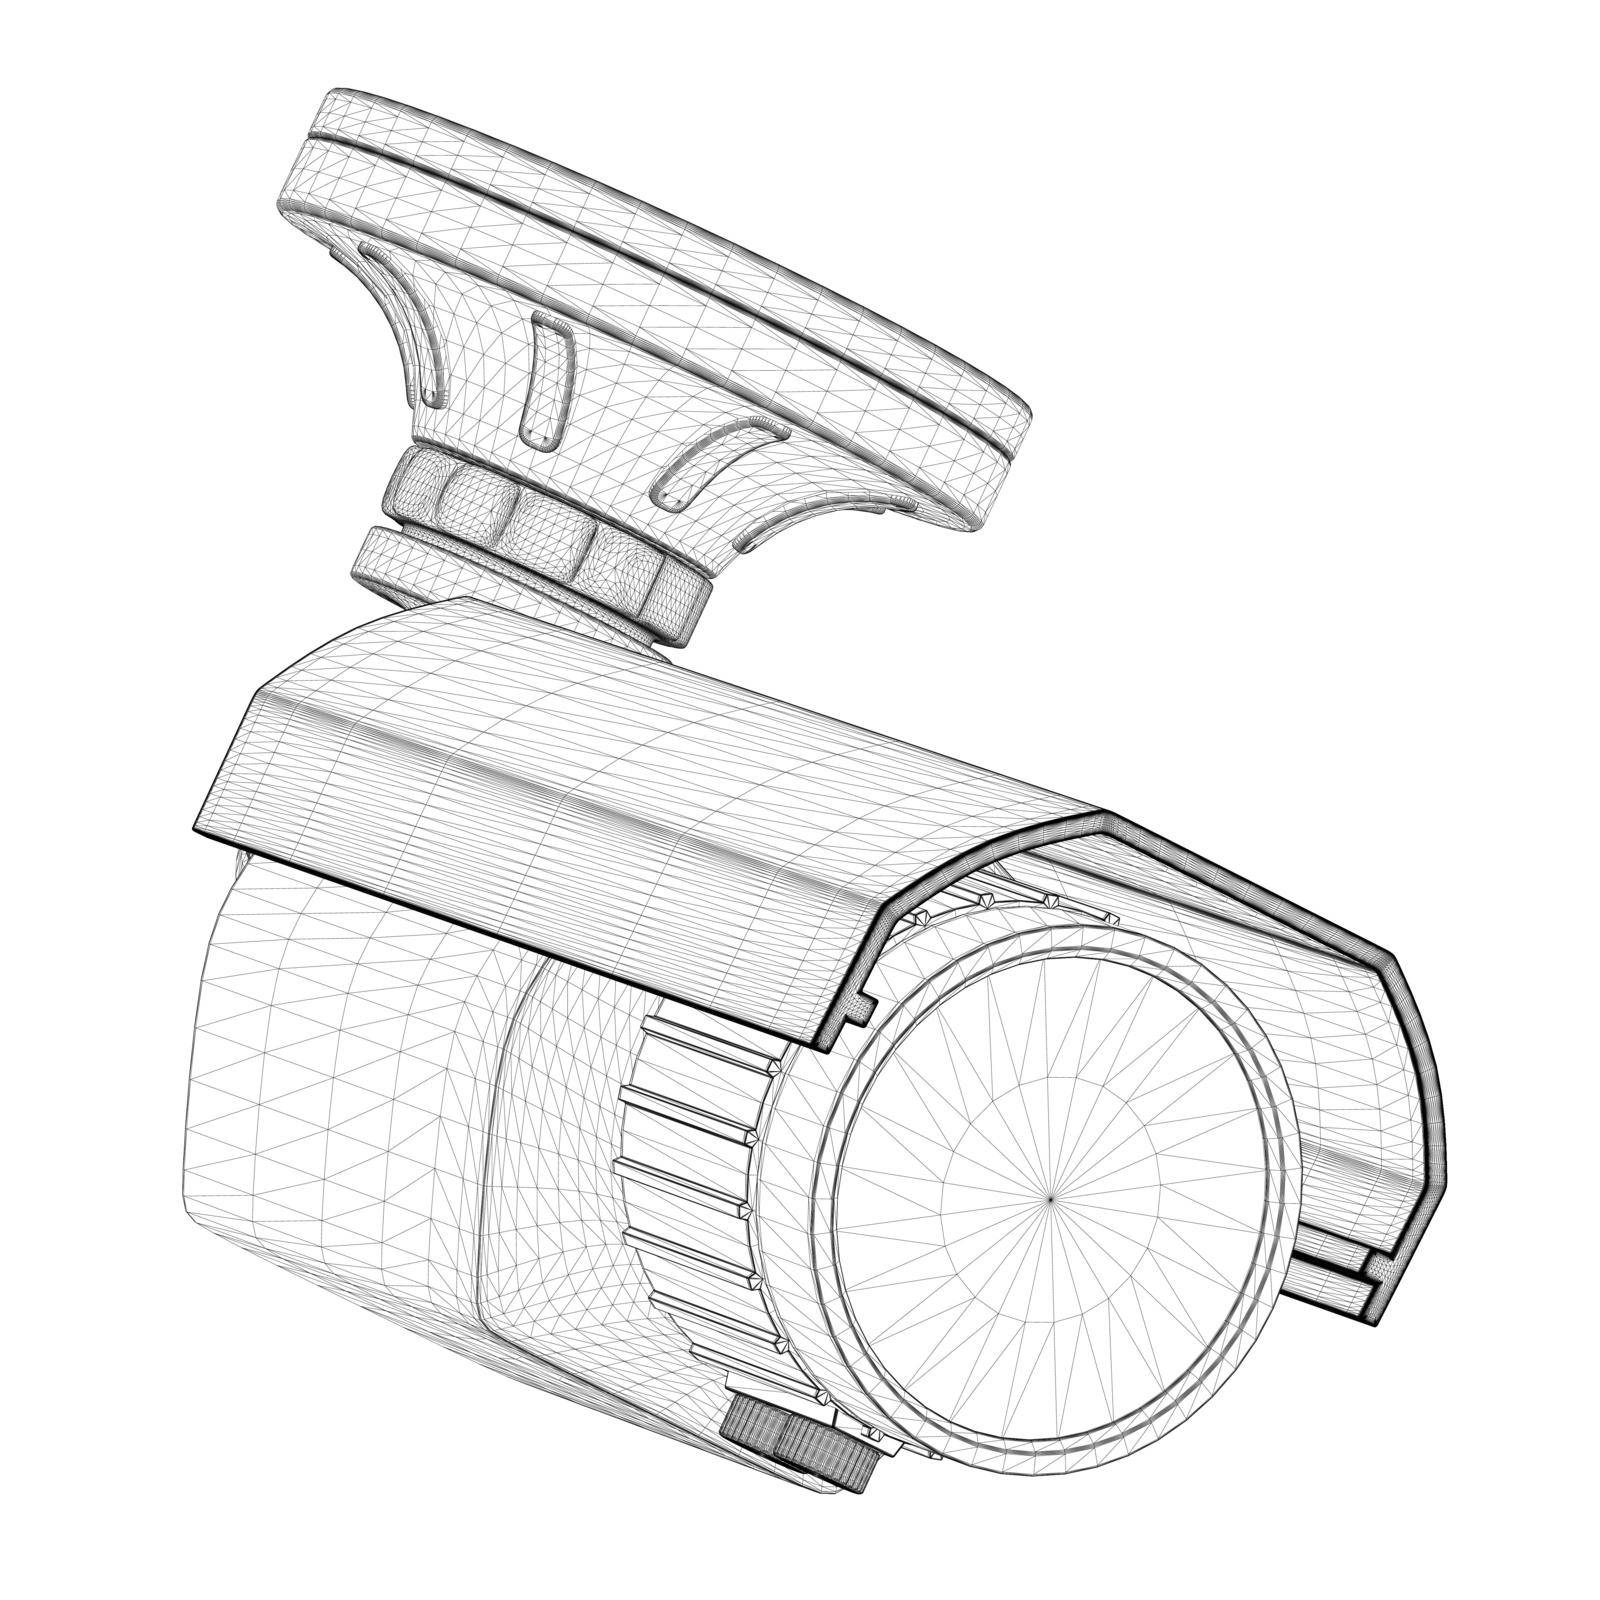 Wireframe cctv camera from black lines isolated on white background. Front view. 3D. Vector illustration.